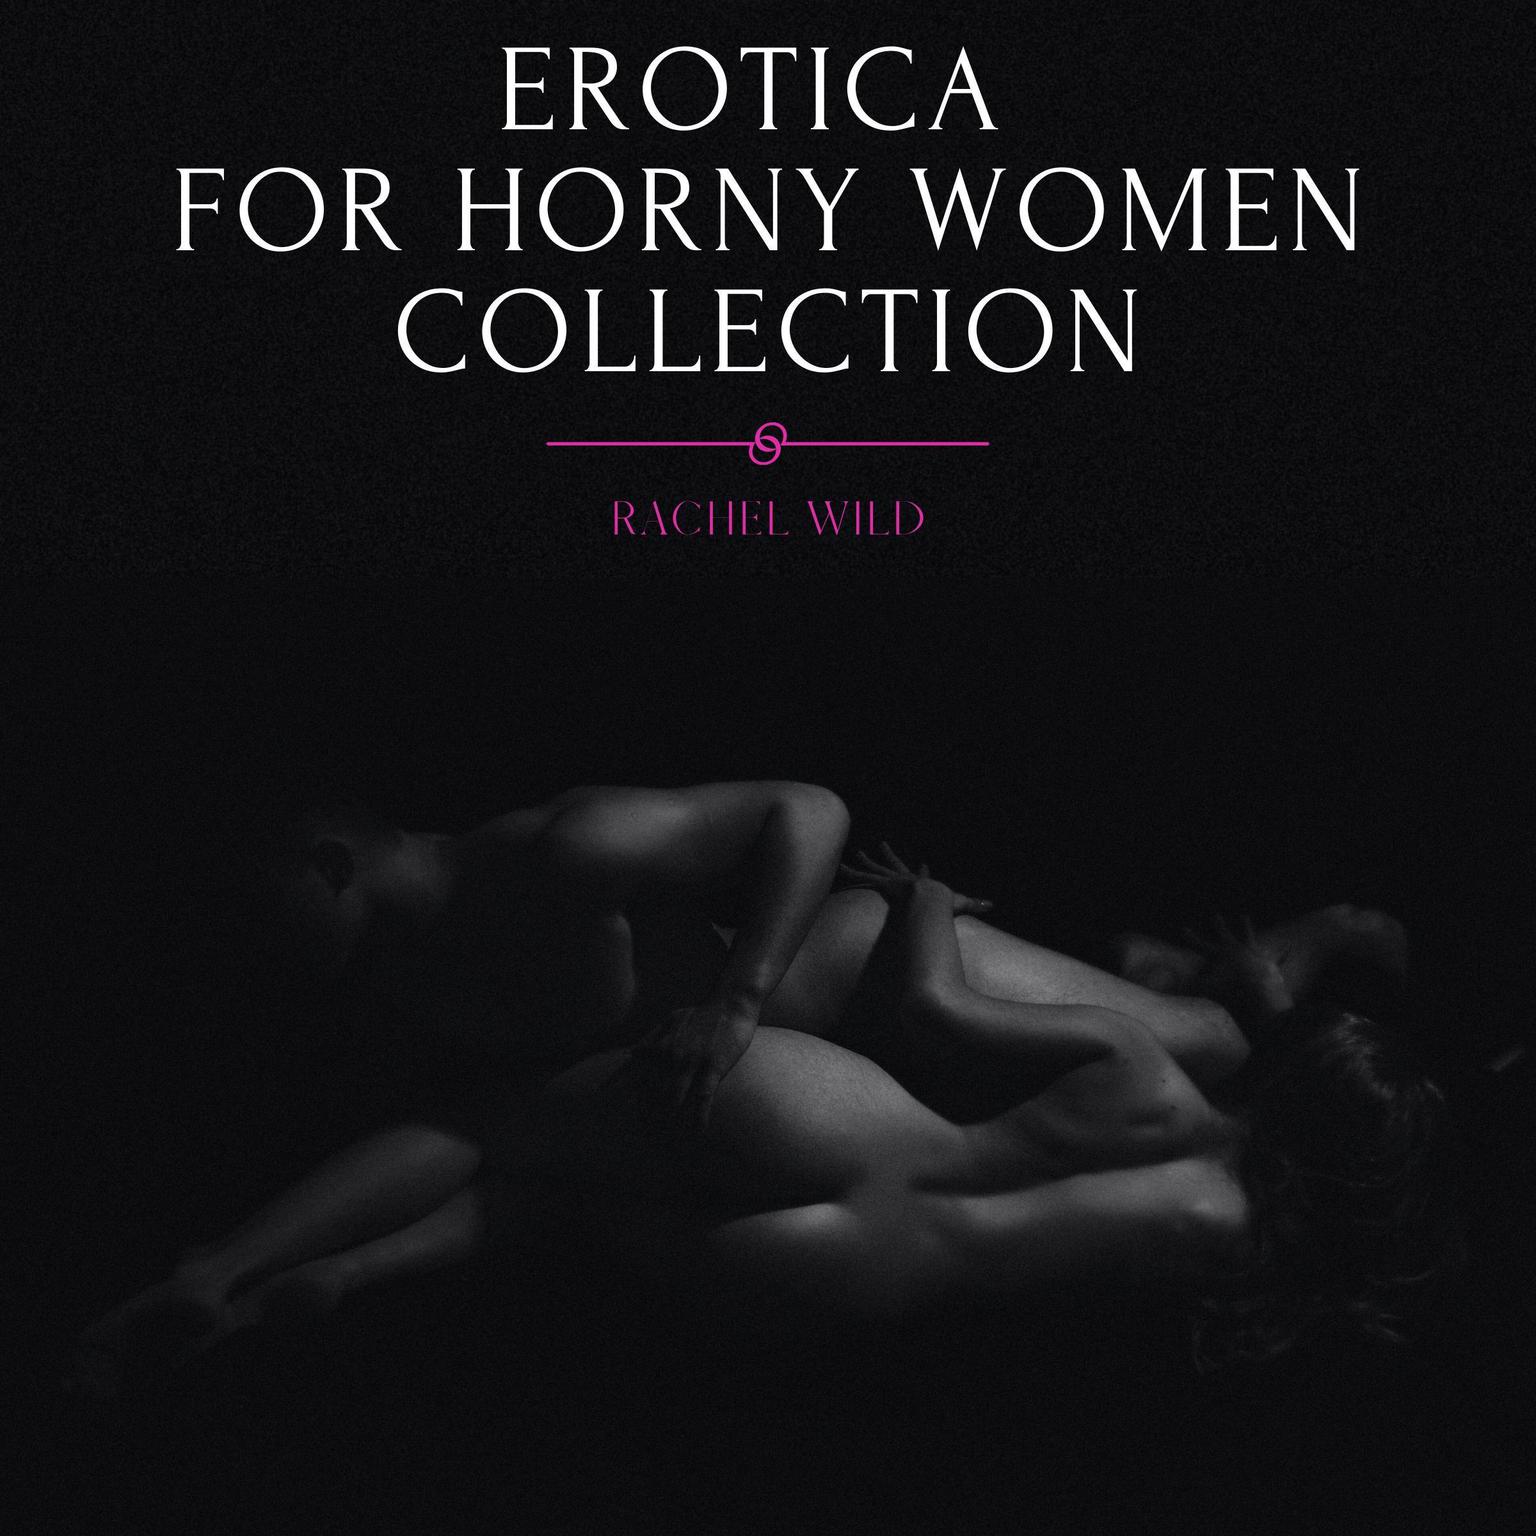 Erotica for Horny Women, Collection: Forbidden Explicit Stories, Threesome Desires and Dirty Sexy Games Audiobook, by Rachel Wild